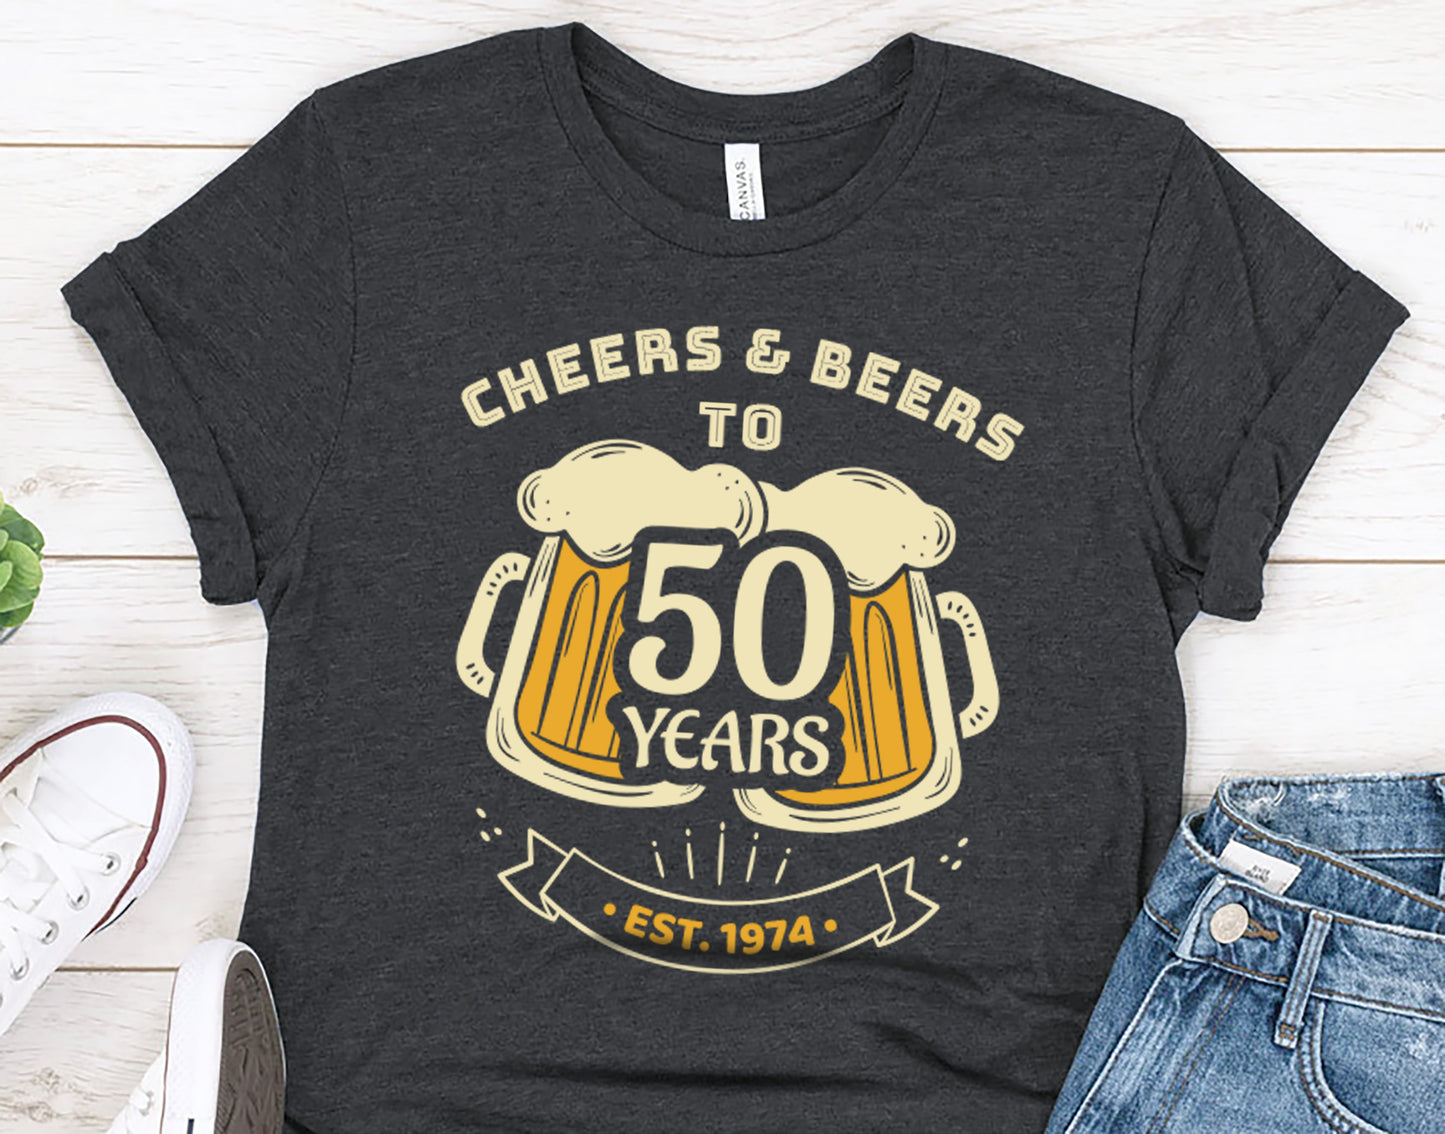 50th Birthday Gift Shirt for Men or Women - Cheers and Beers to 50 Years tee for Wife or Husband